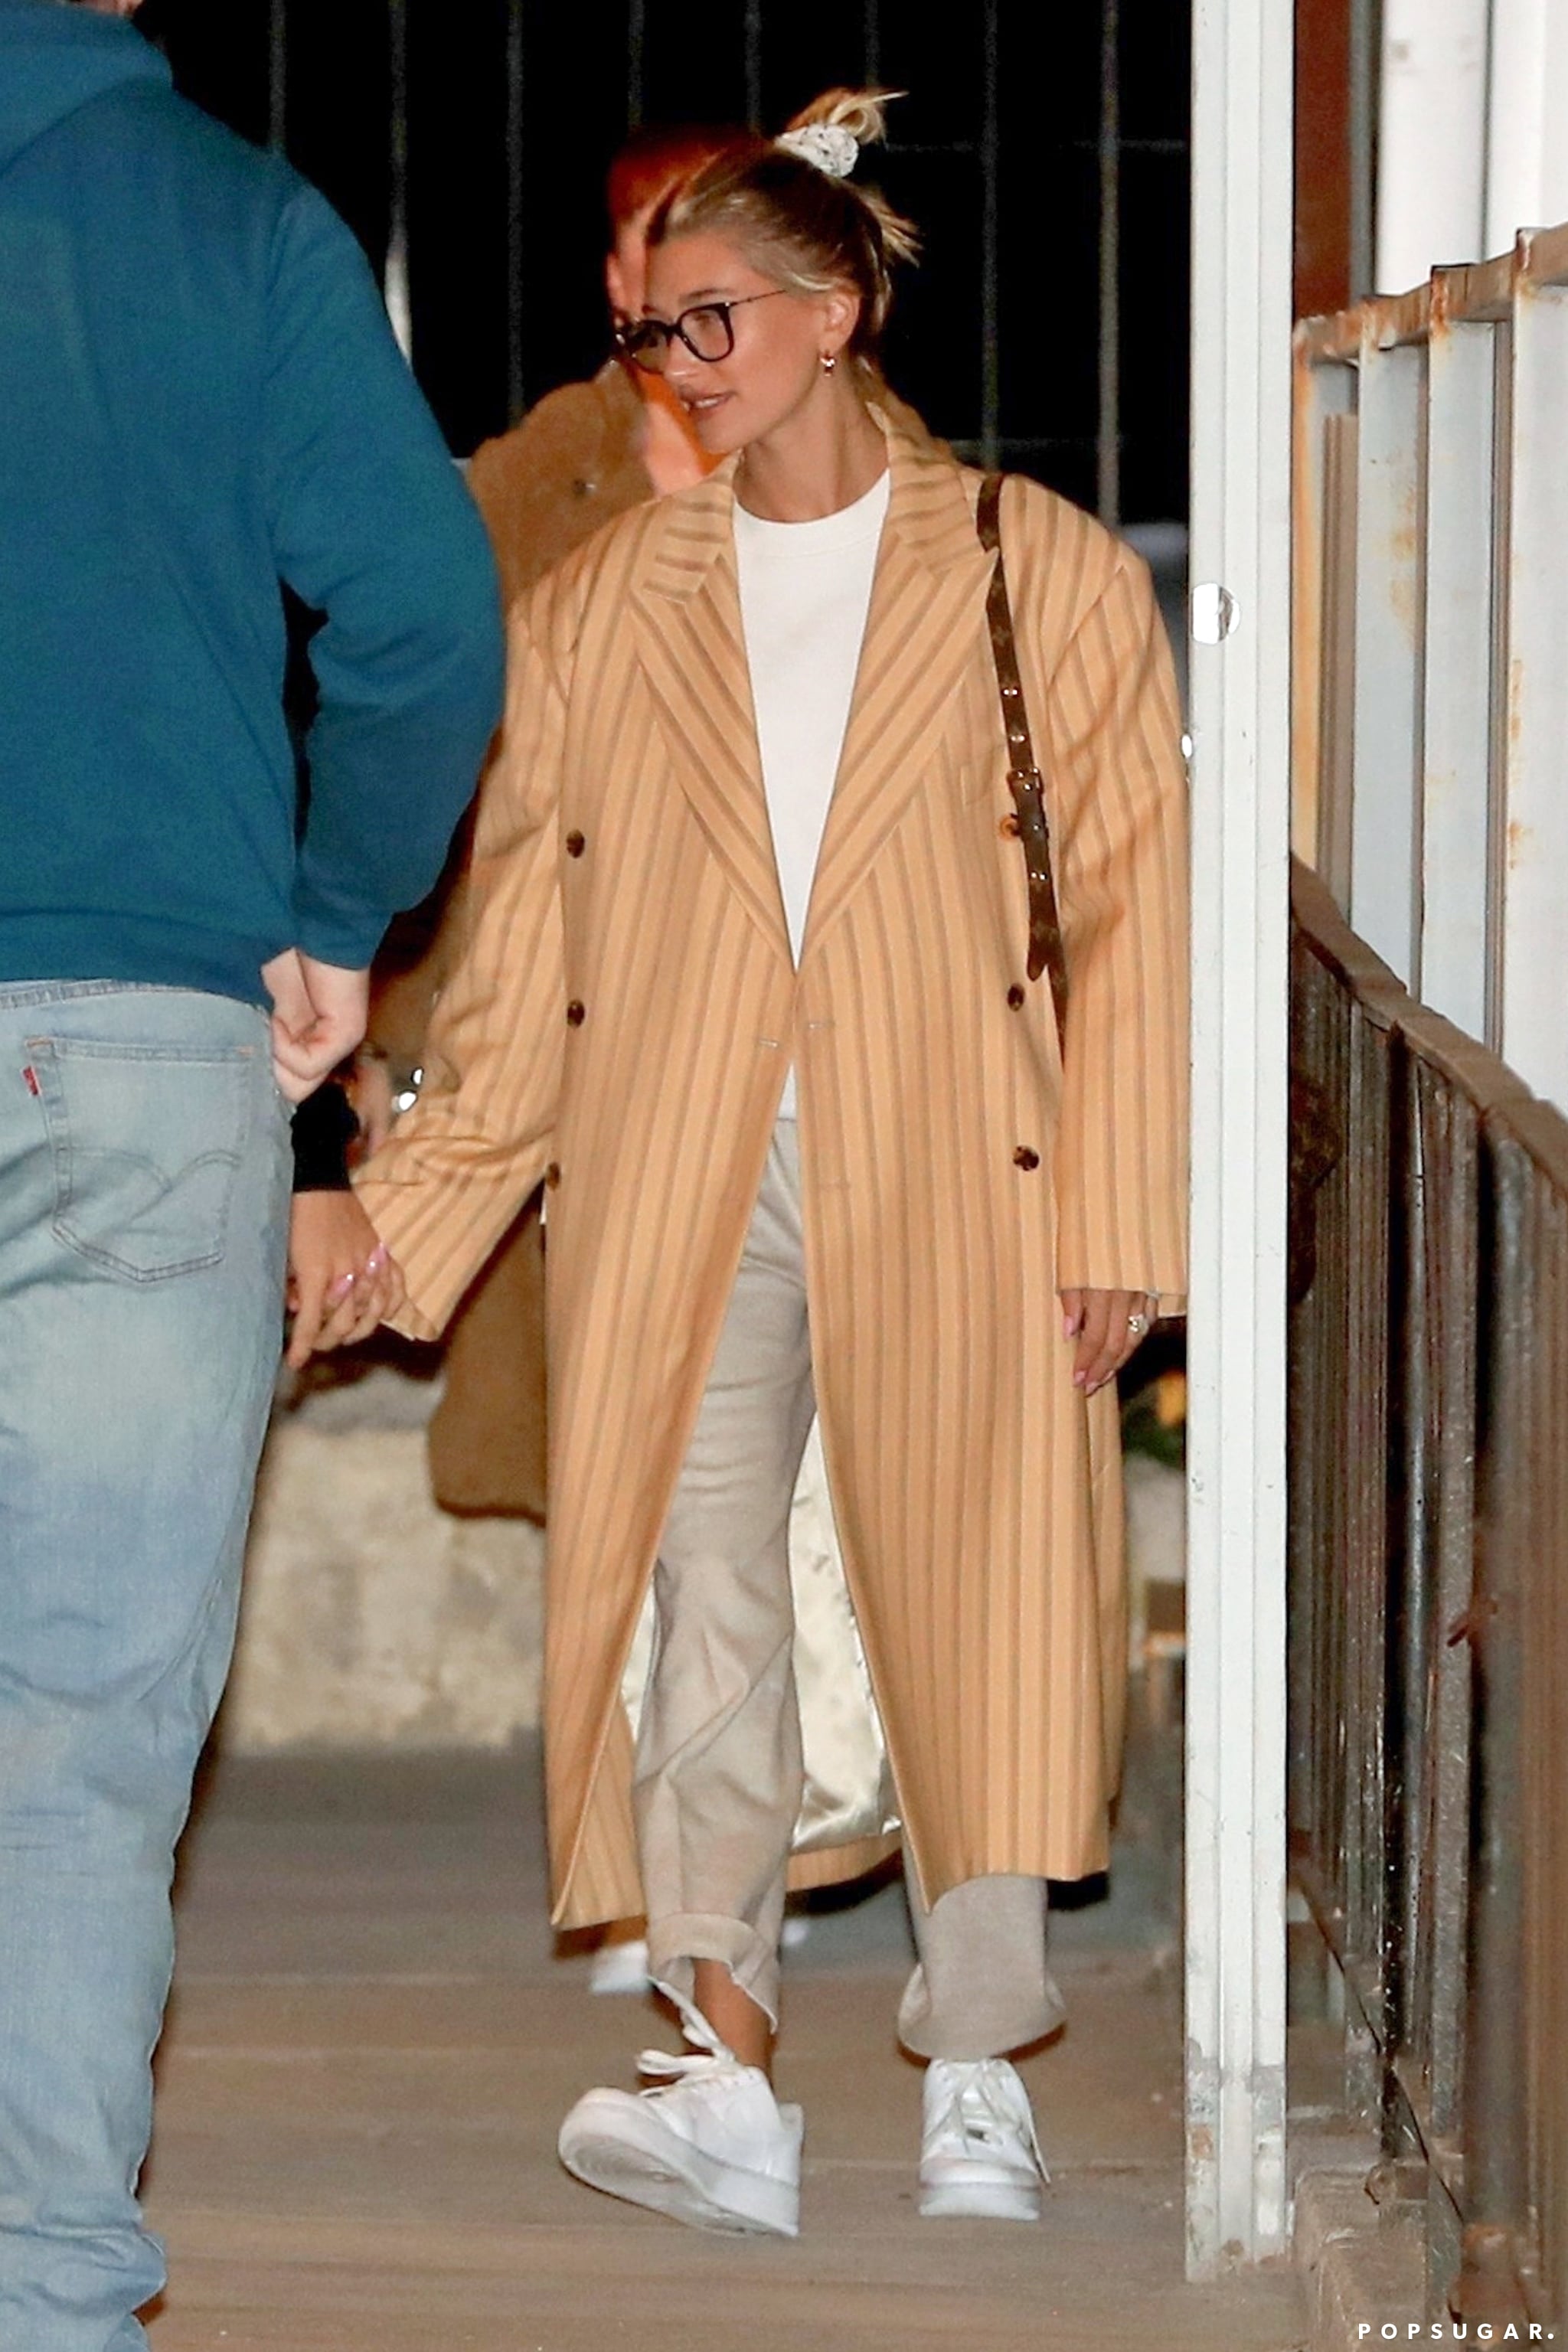 Hailey Baldwin's Oversized Striped Coat With Justin Bieber